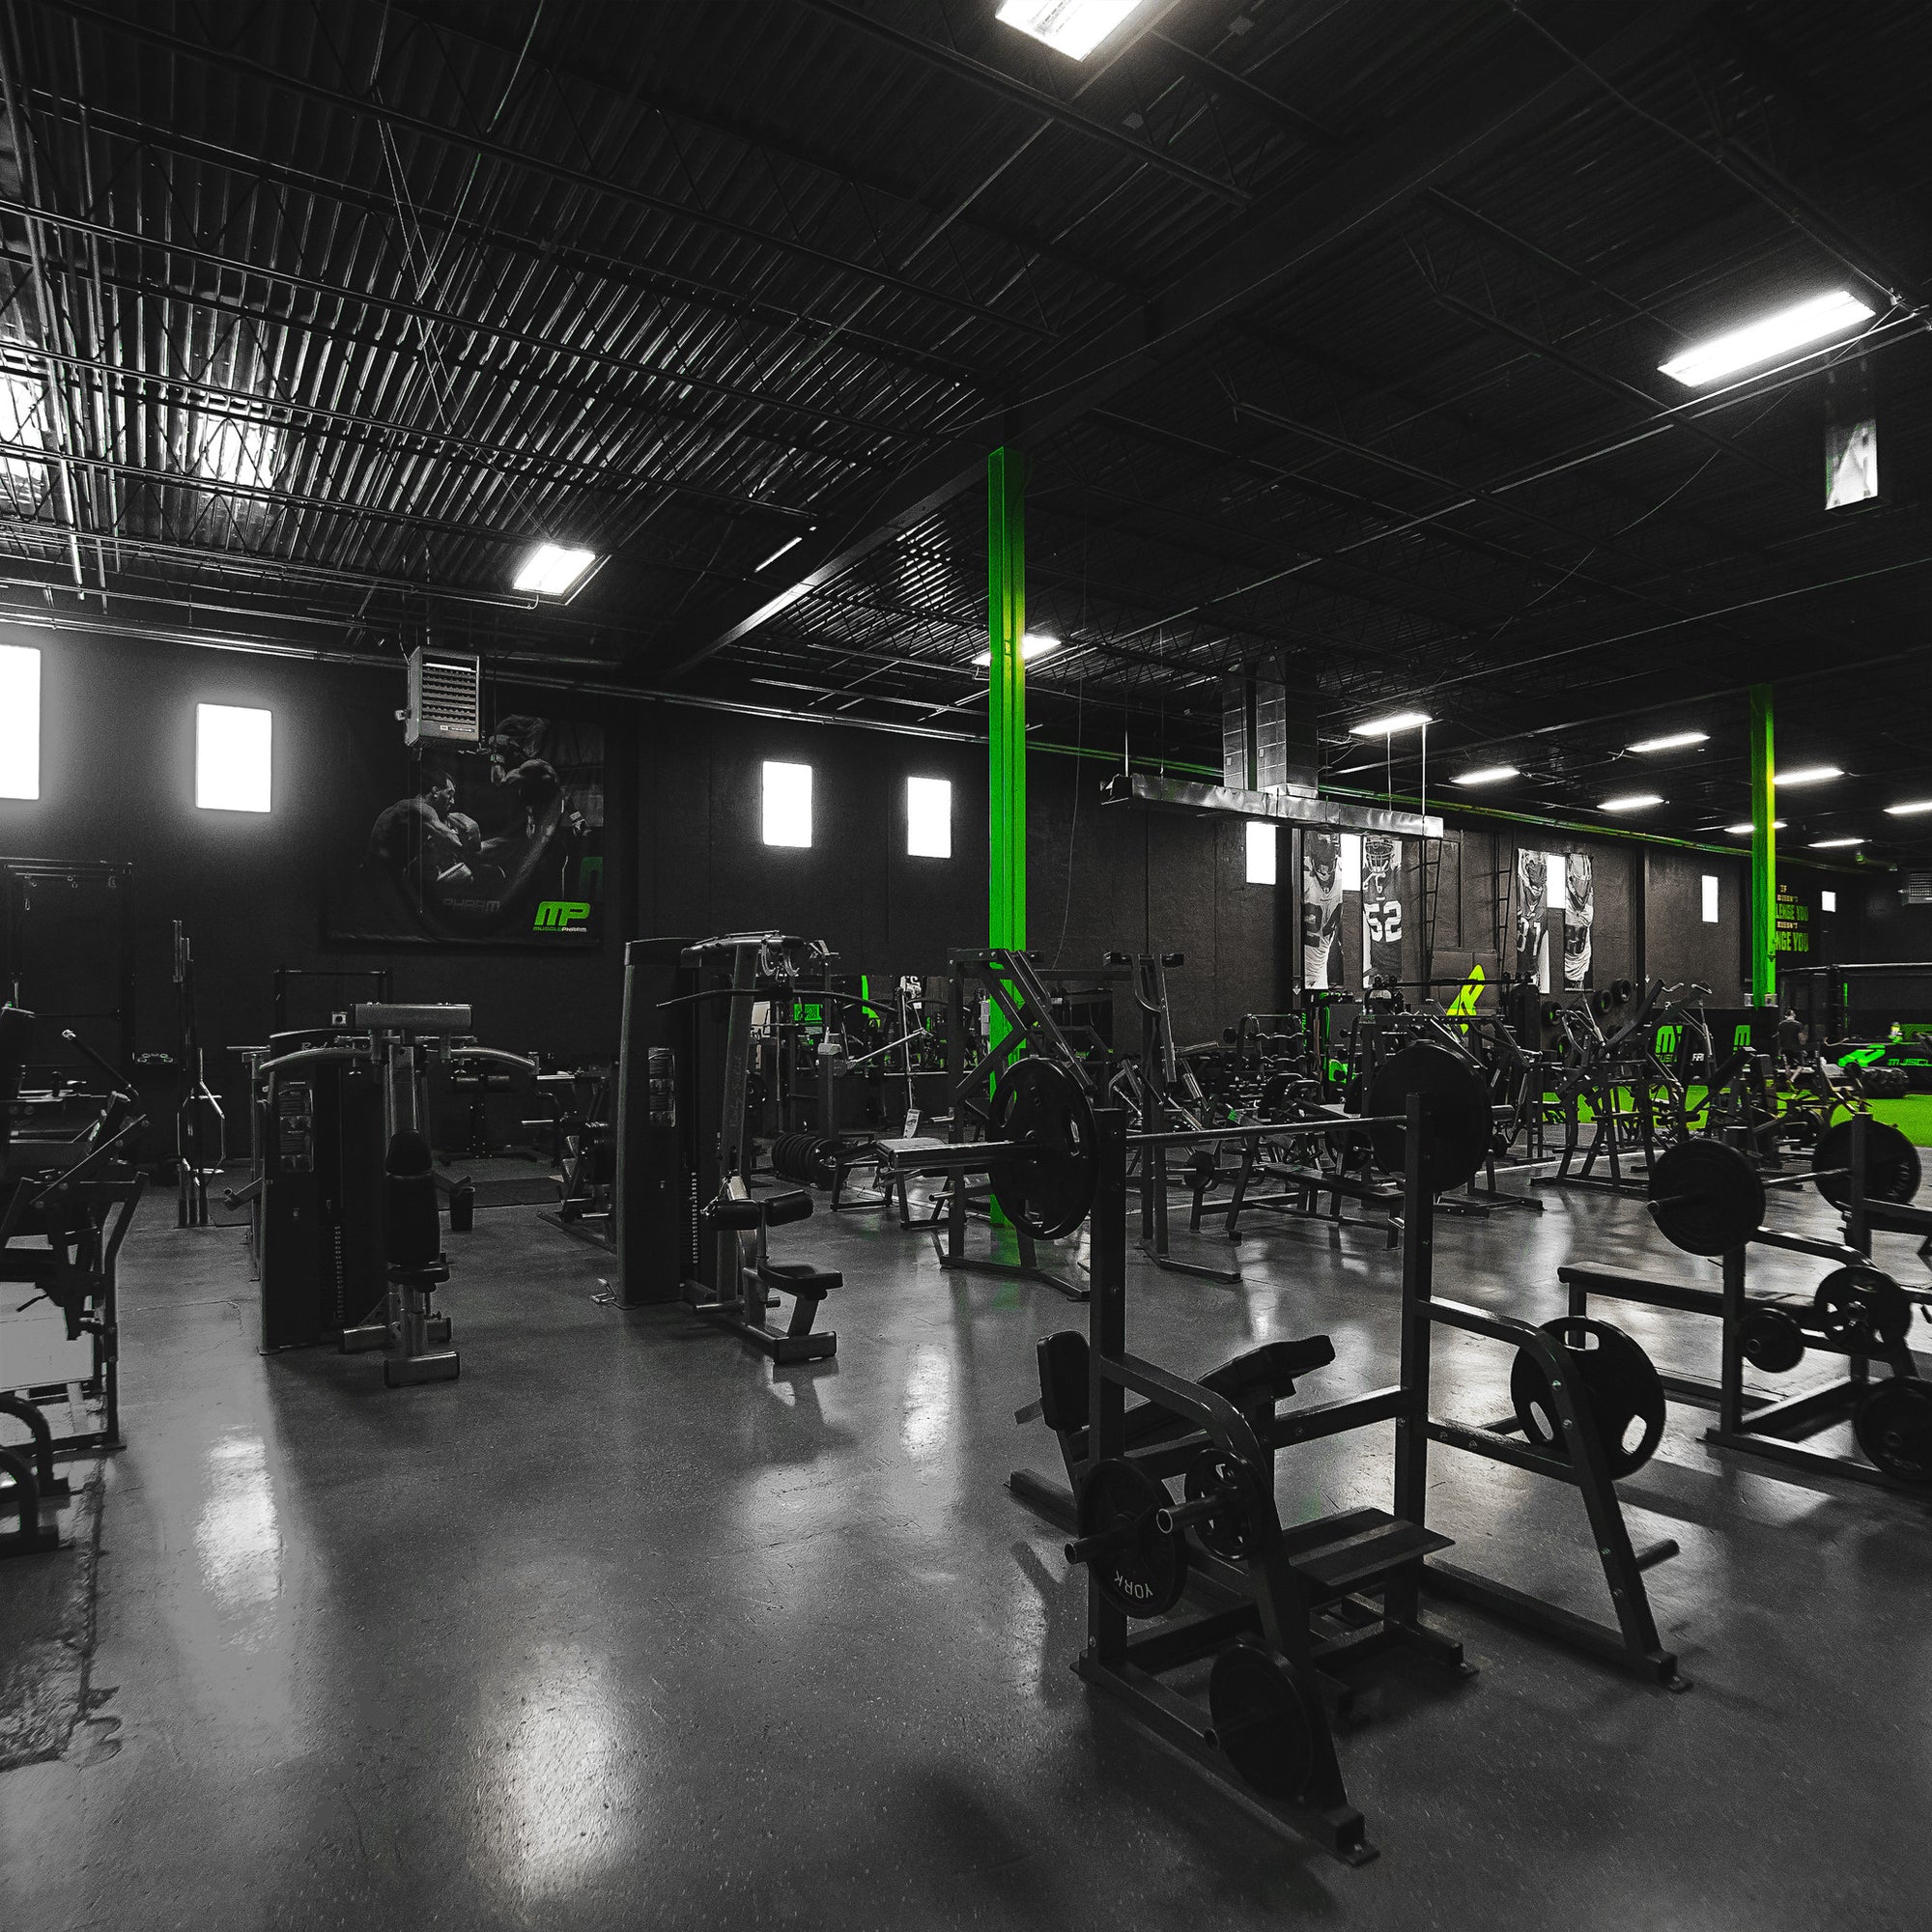 rone Footage of the MusclePharm HQ